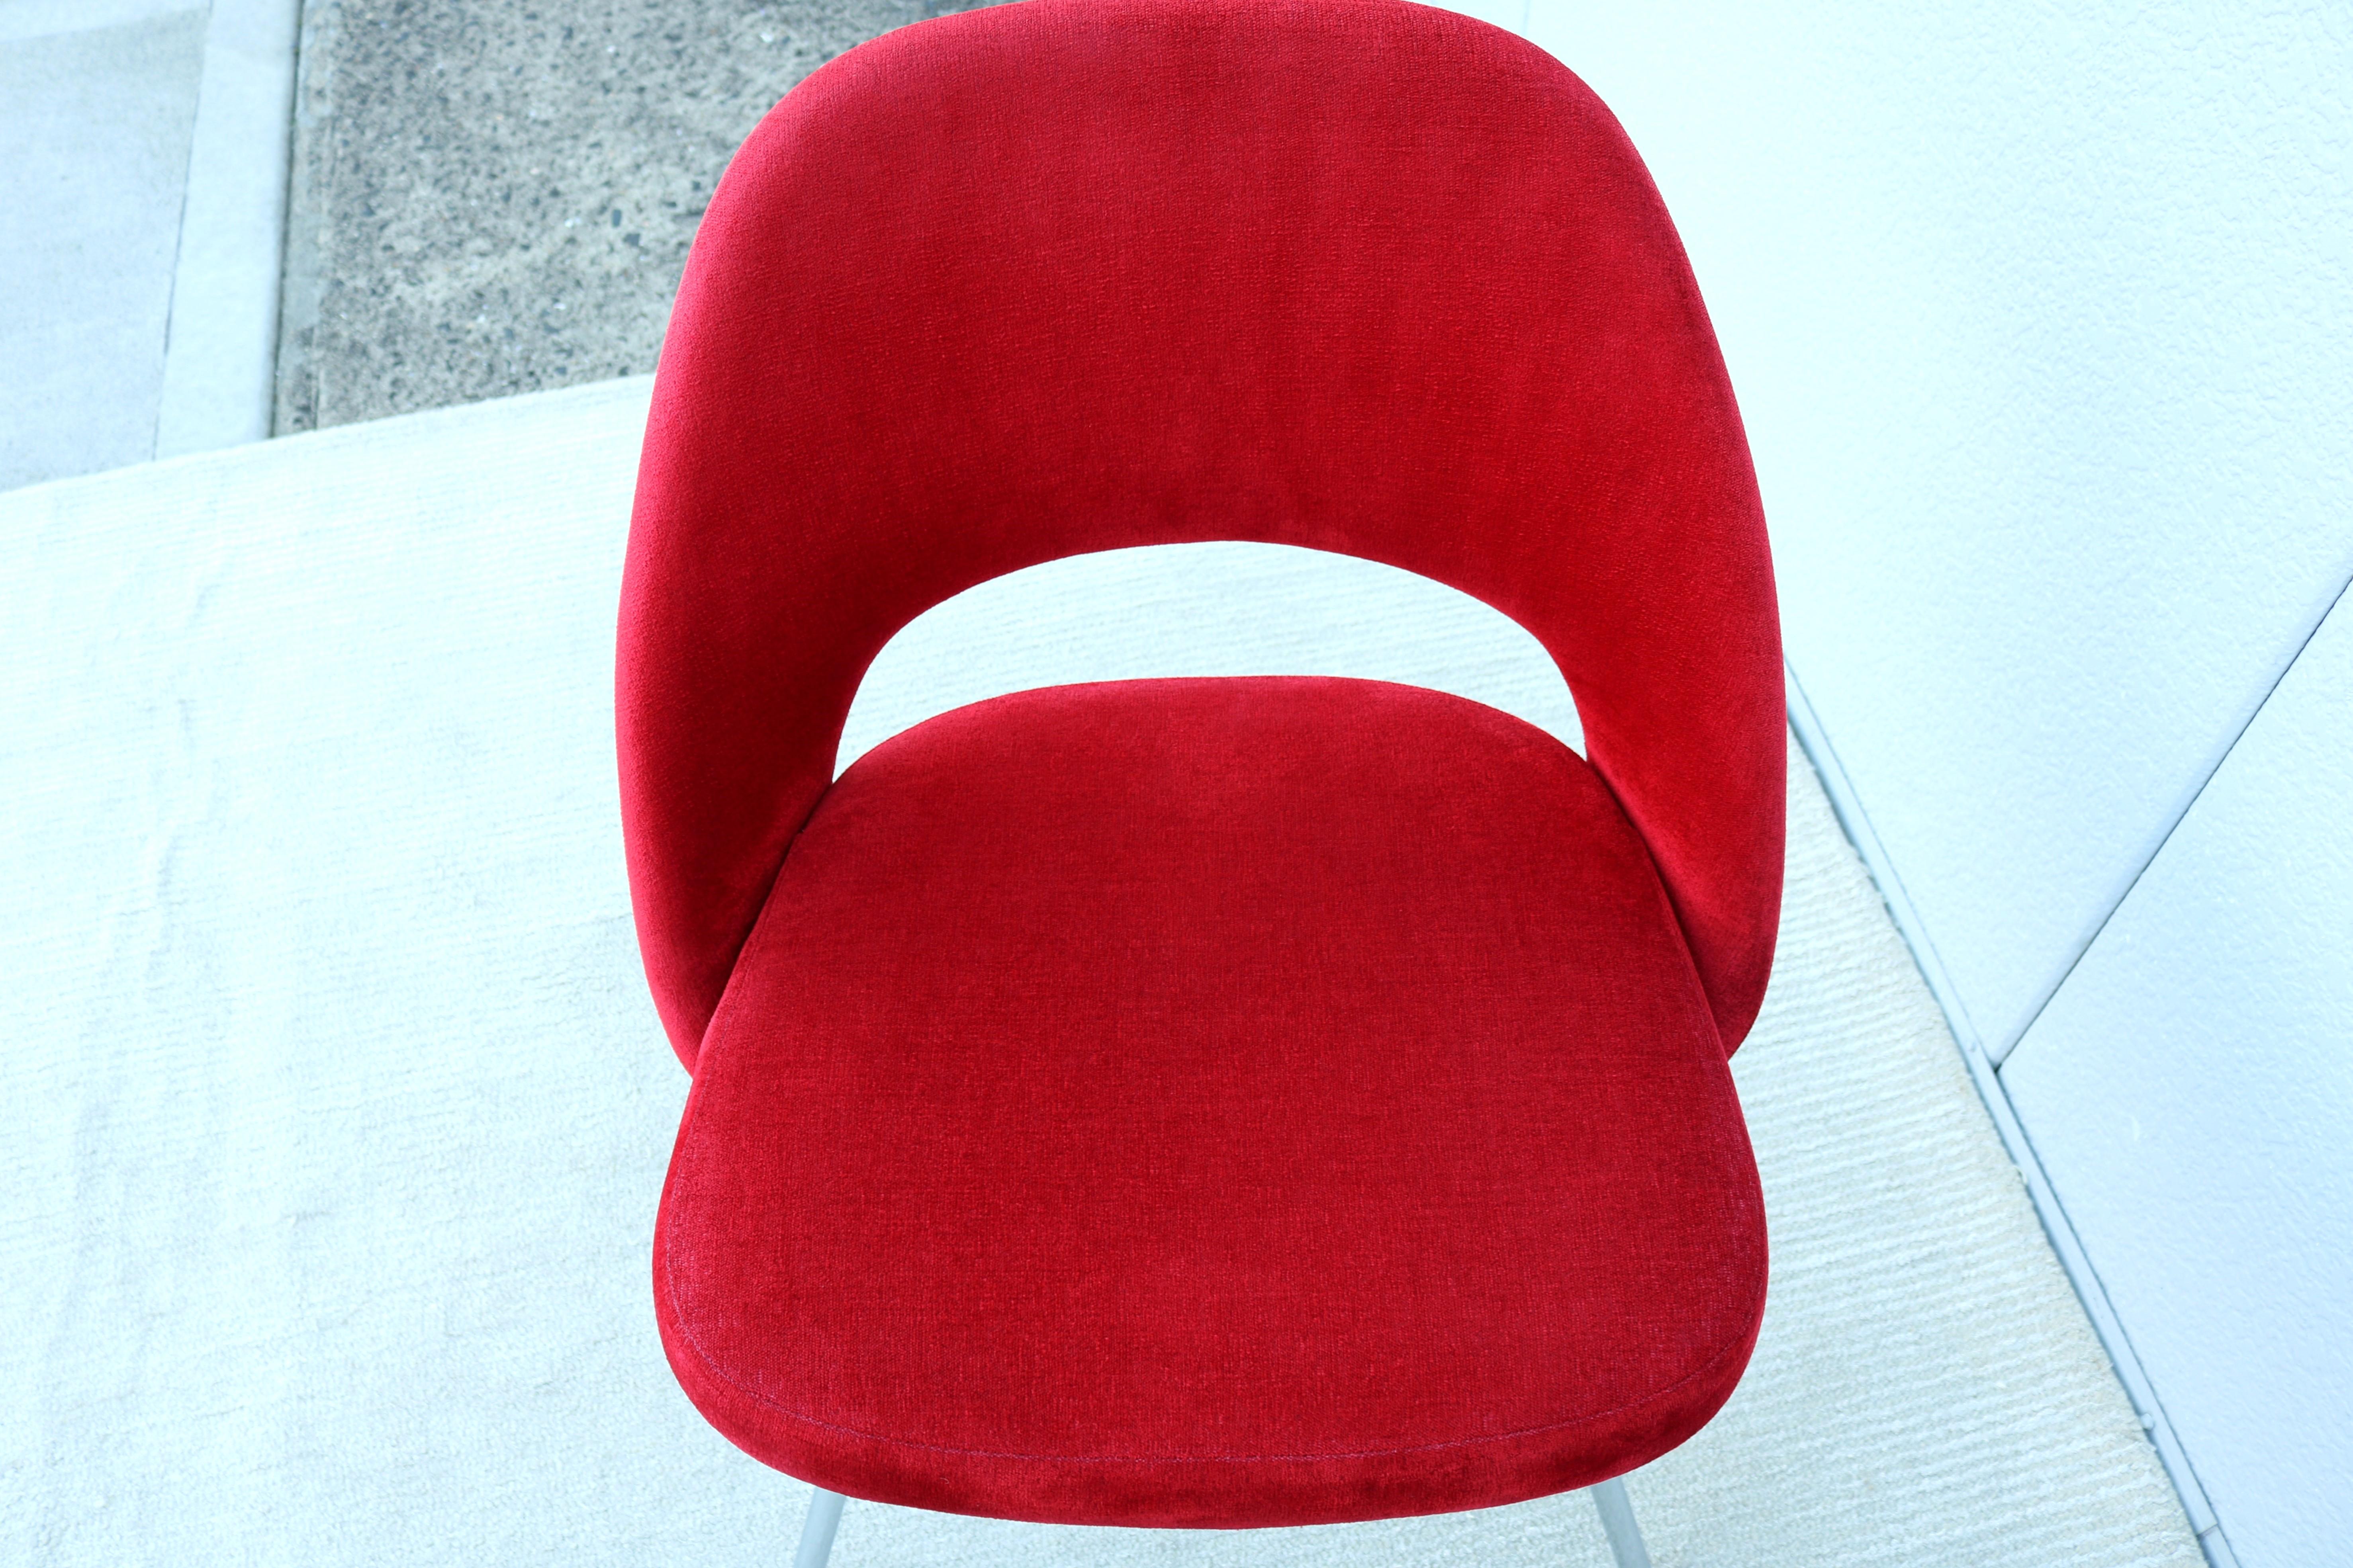 Mid-Century Modern Eero Saarinen for Knoll Red Executive Armless Chairs - a Pair For Sale 8